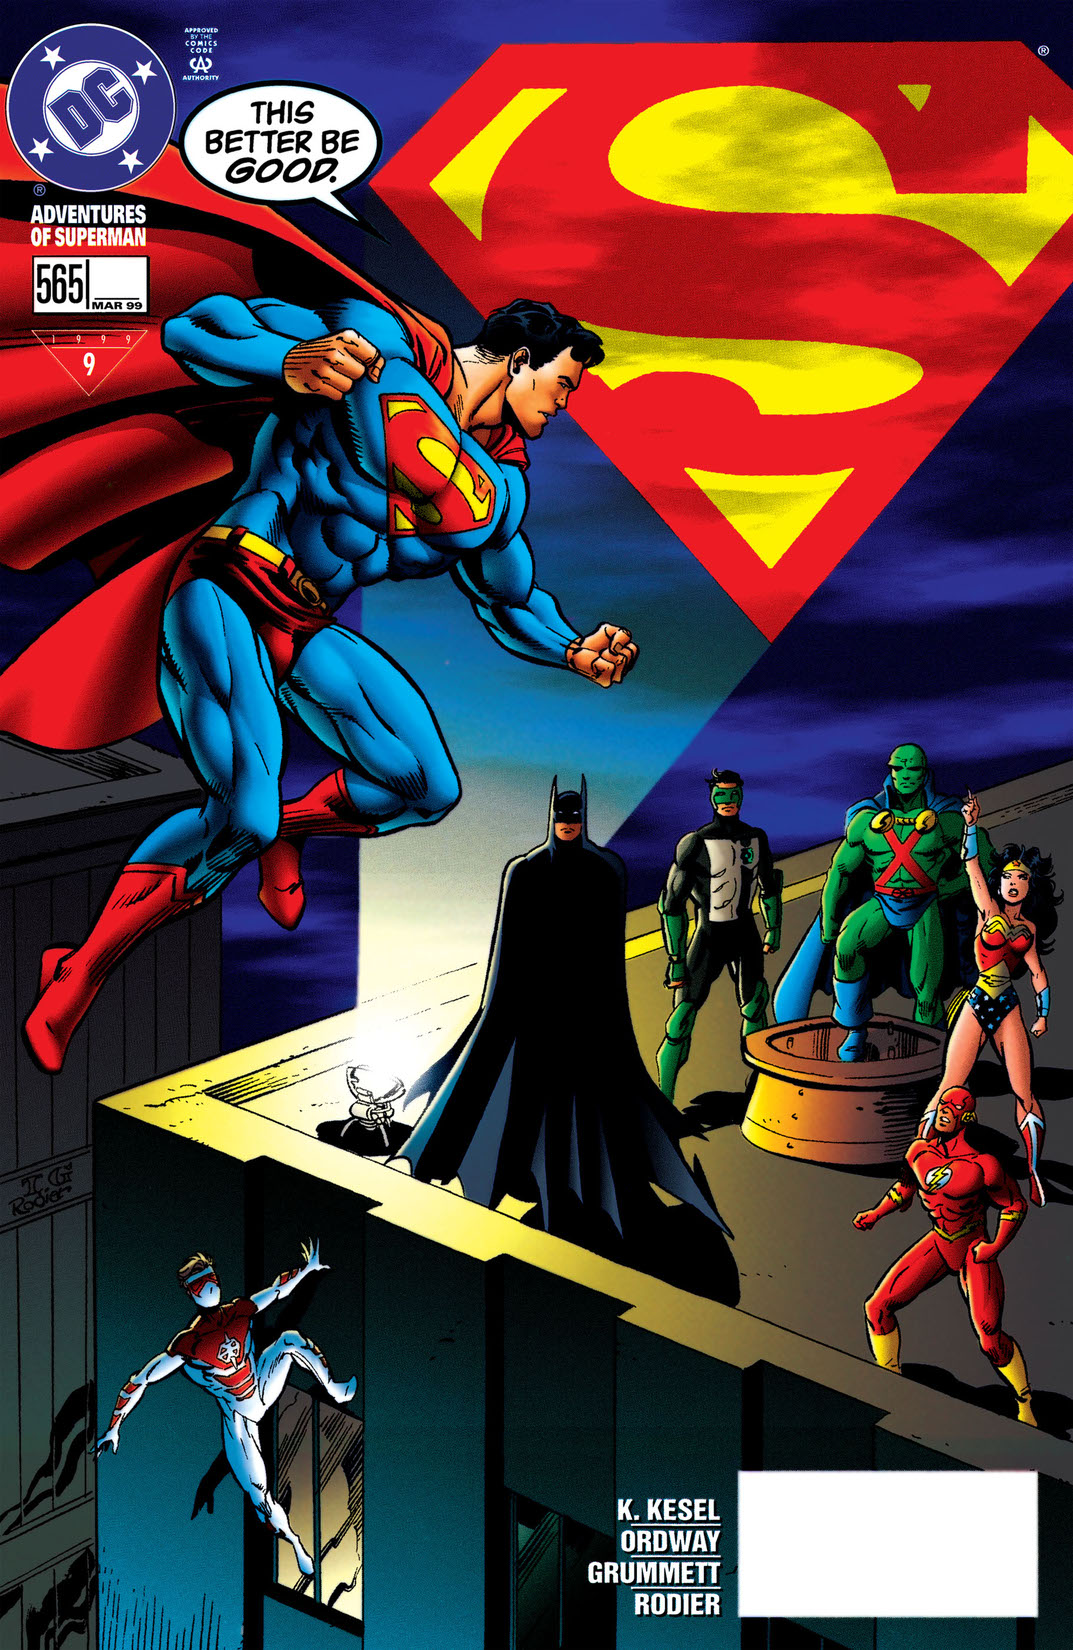 Adventures of Superman (1987-2006) #565 preview images